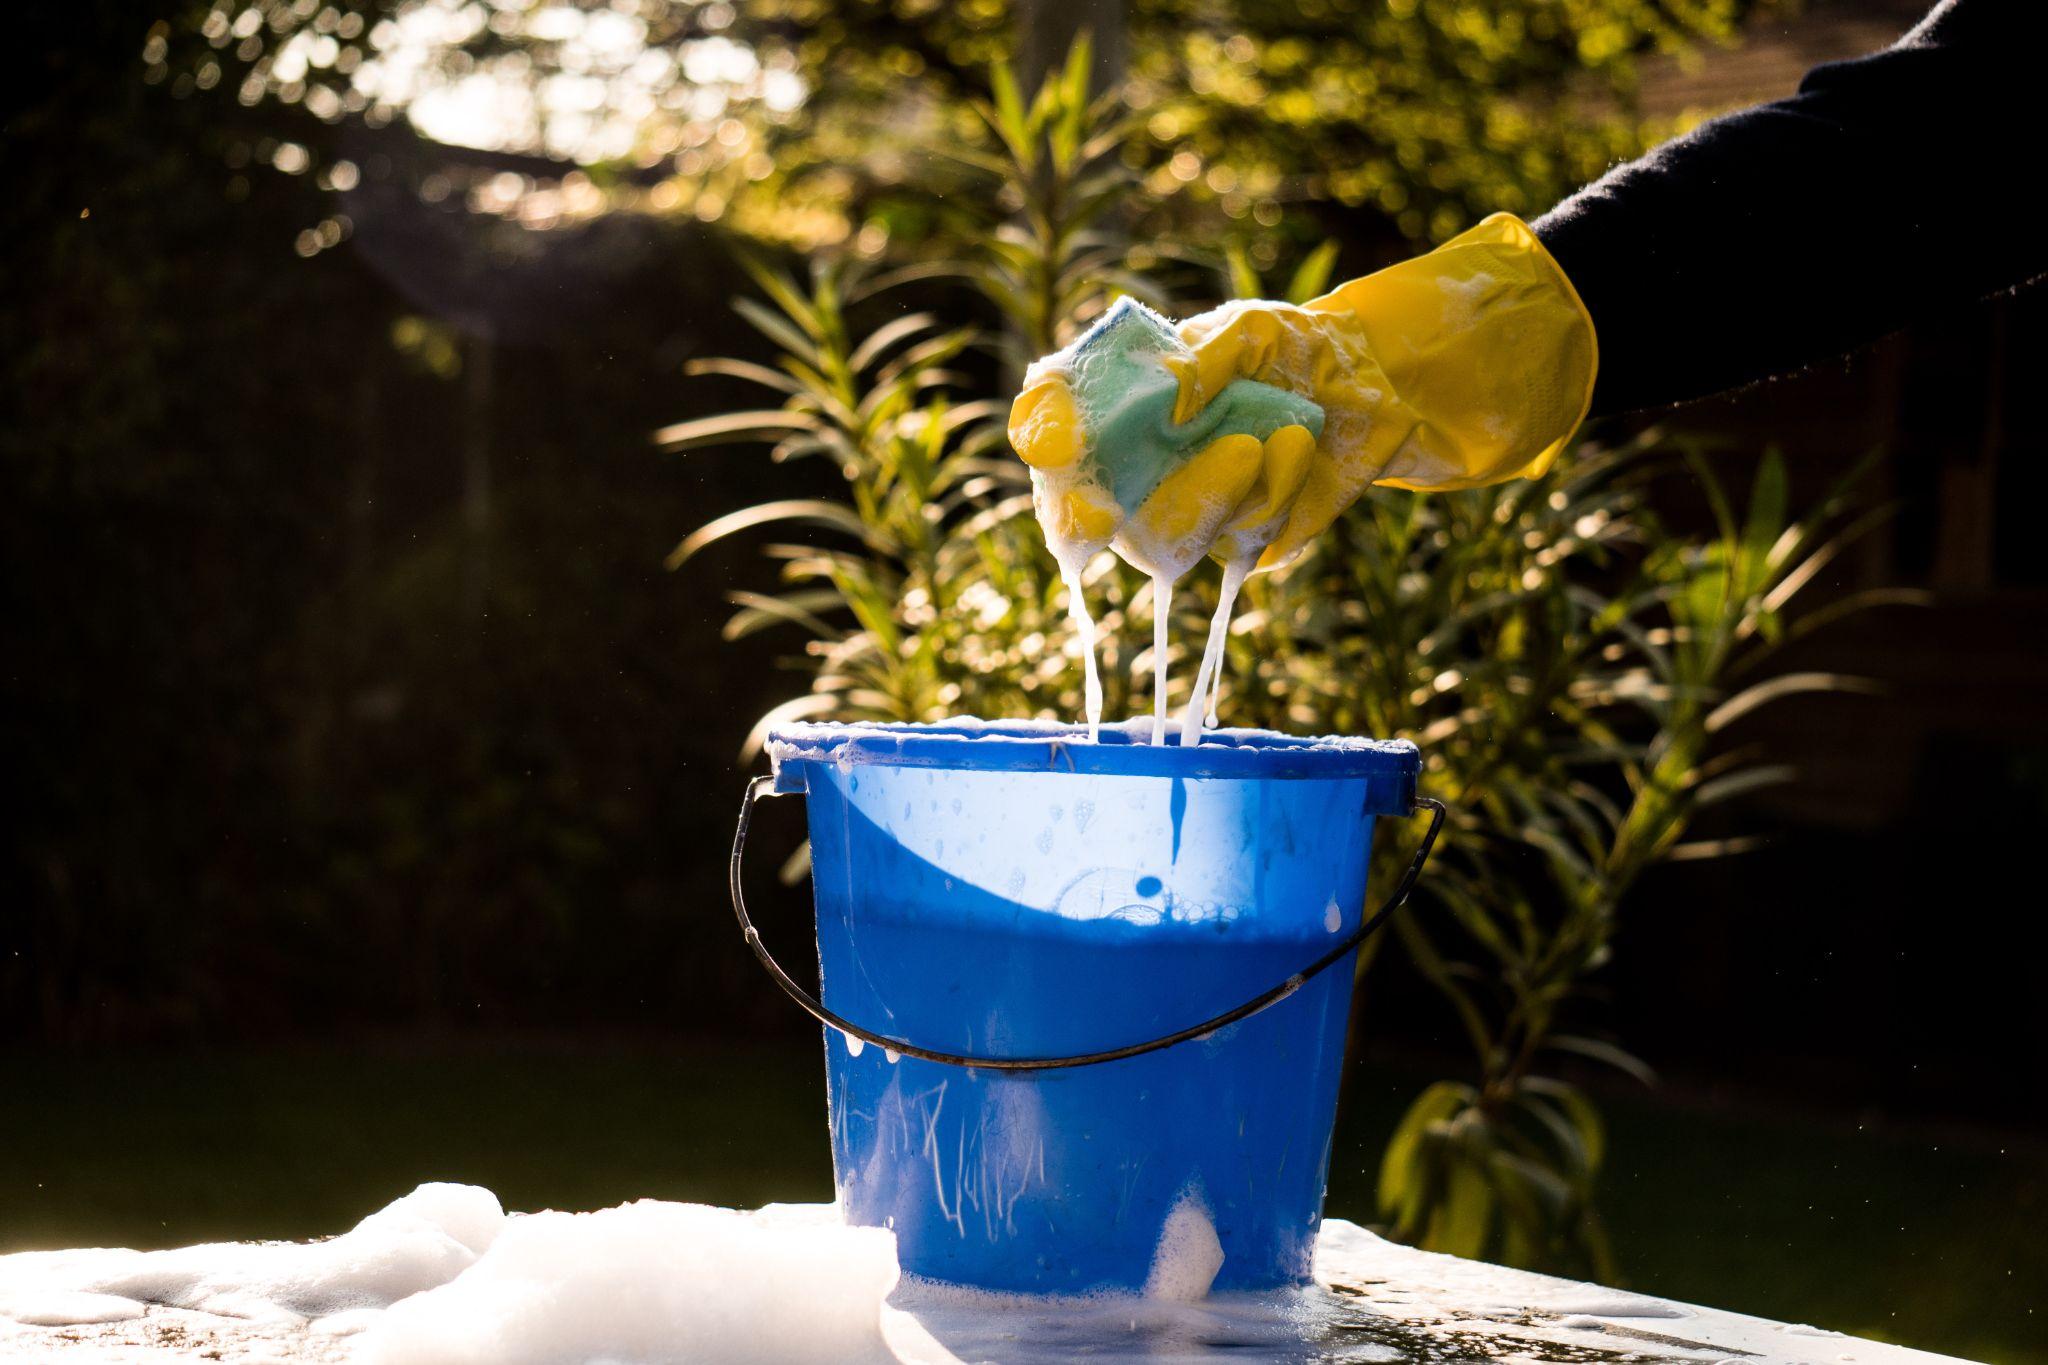 Spring Cleaning outside with big yellow cleaning gloves, water, soap and a big blue bucket with soap.